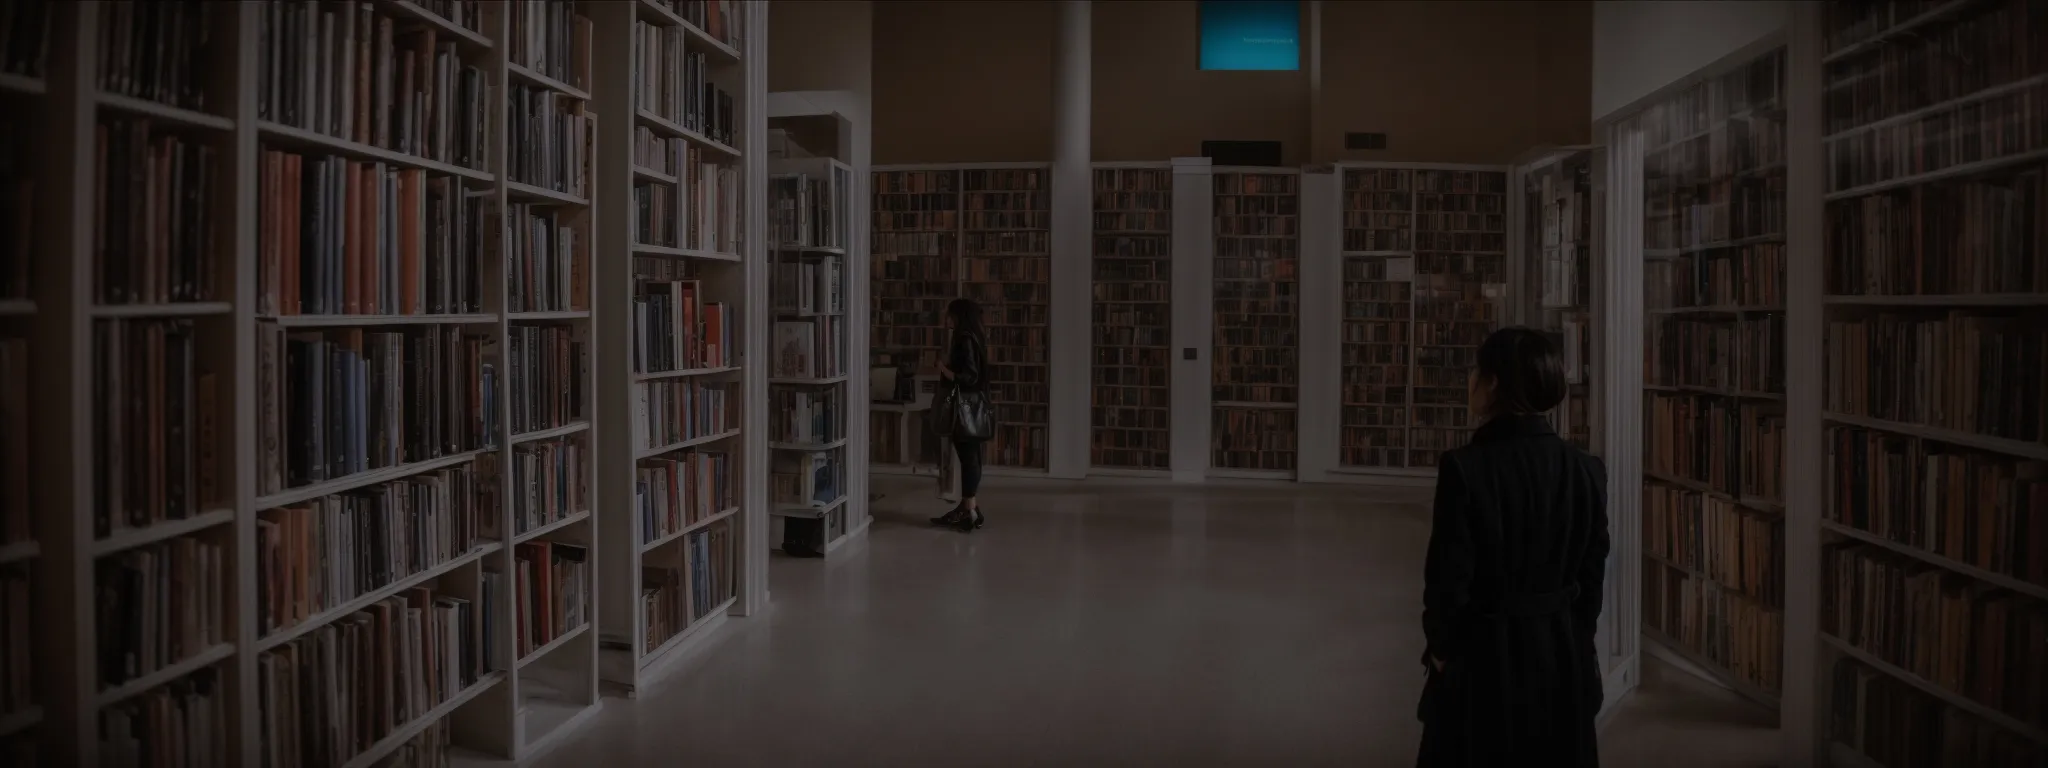 a person standing at the entrance of a vast library, pondering which book to select from a section labeled 